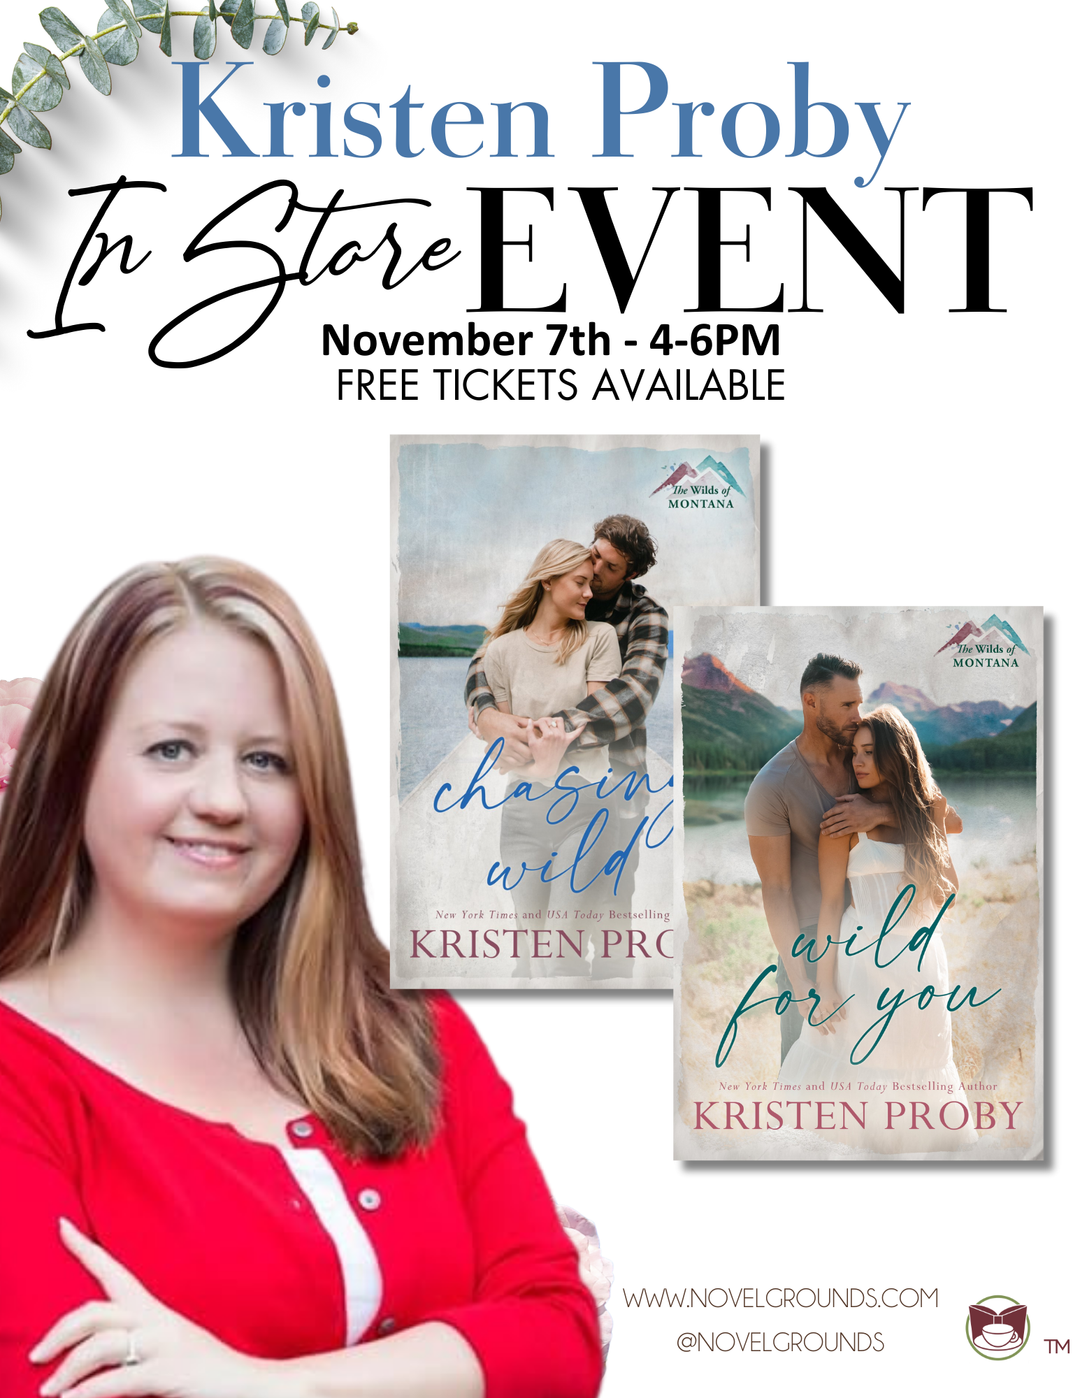 Kristen Proby Signing Event Ticket - November 7th -4-6 pm